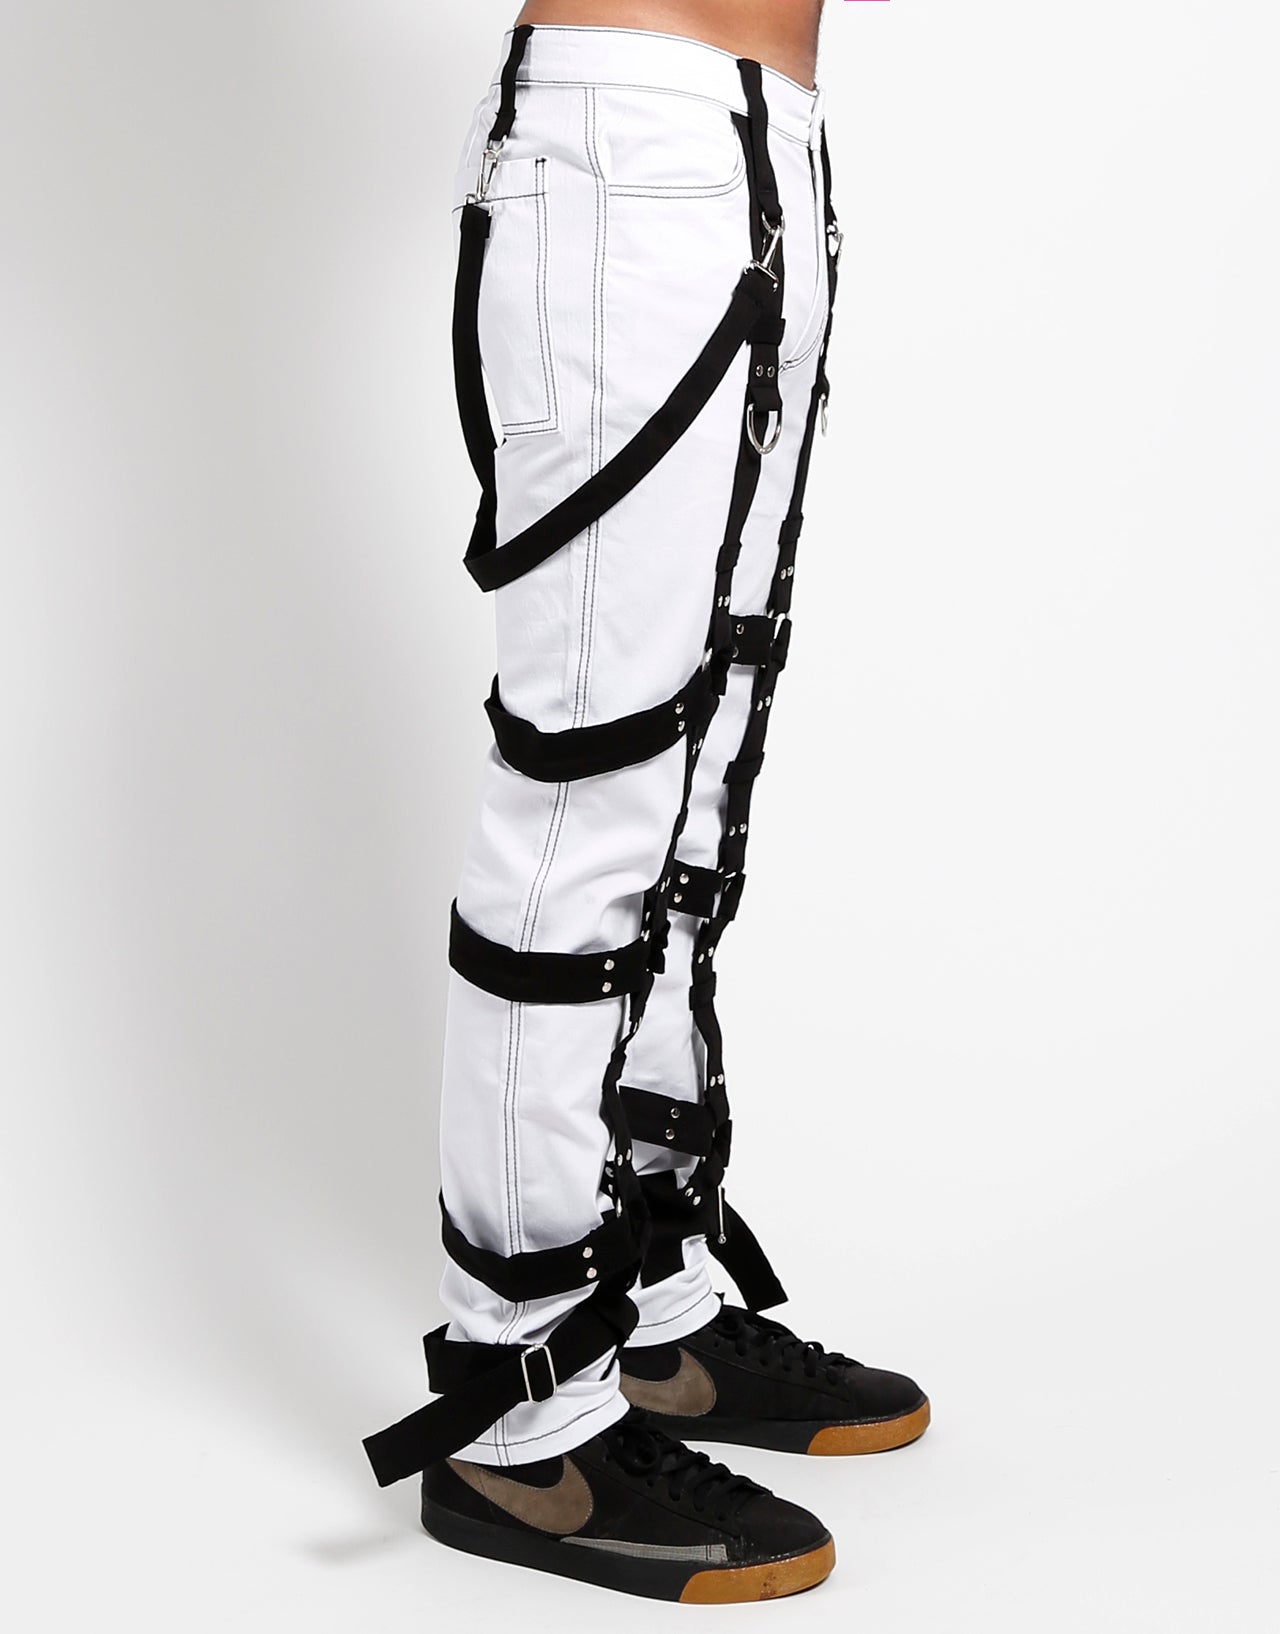 THE WHITE HARNESS PANT